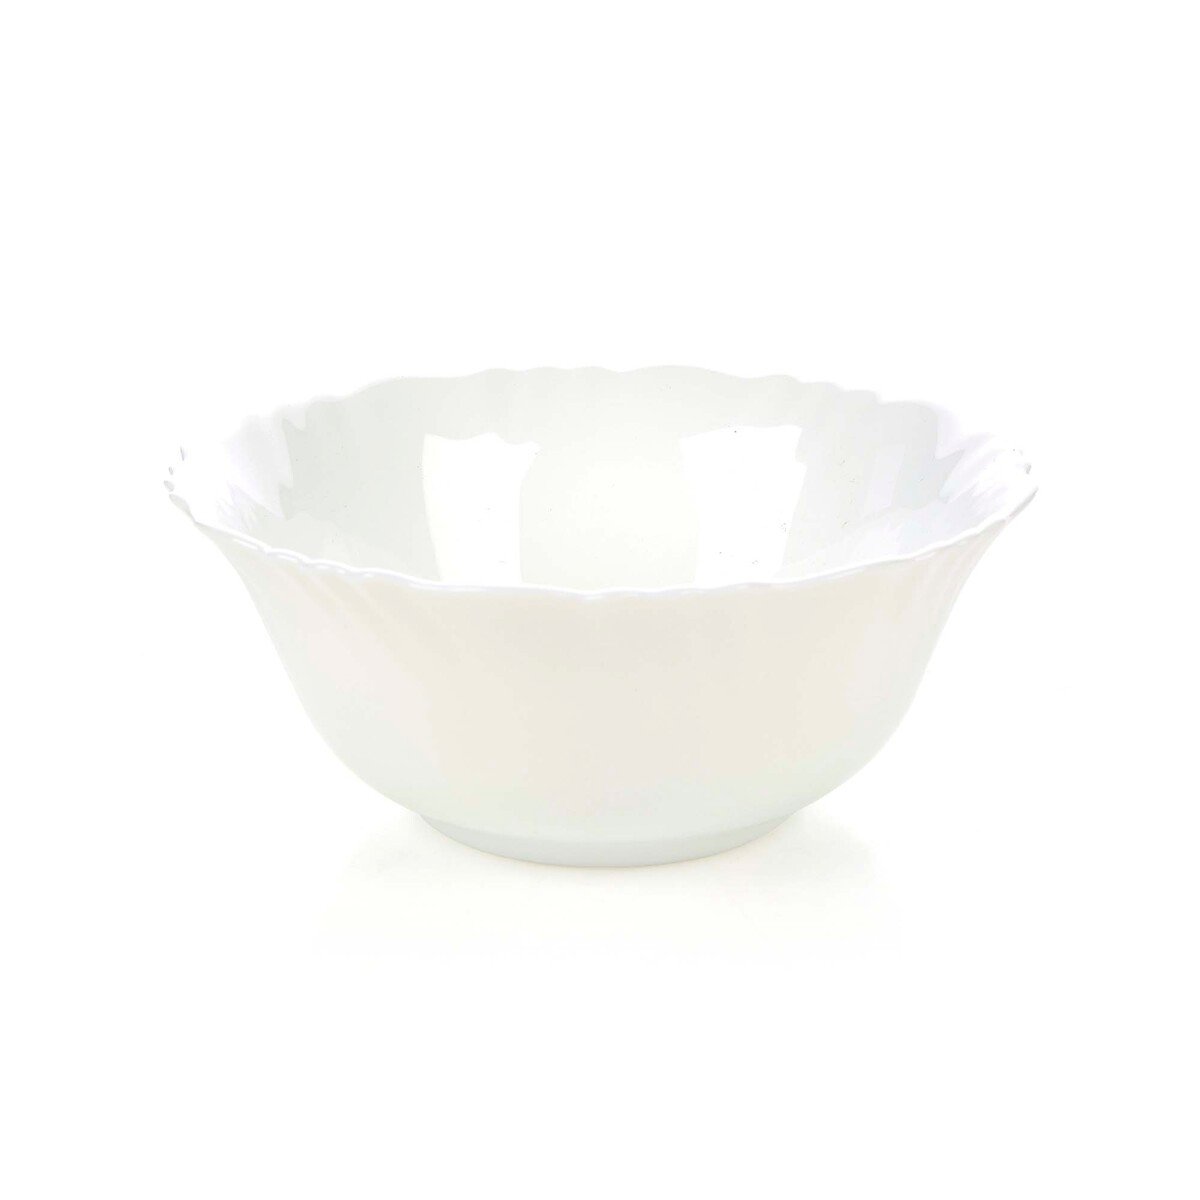 Cello Serving Bowl, 8 Inches, PW17.5-C